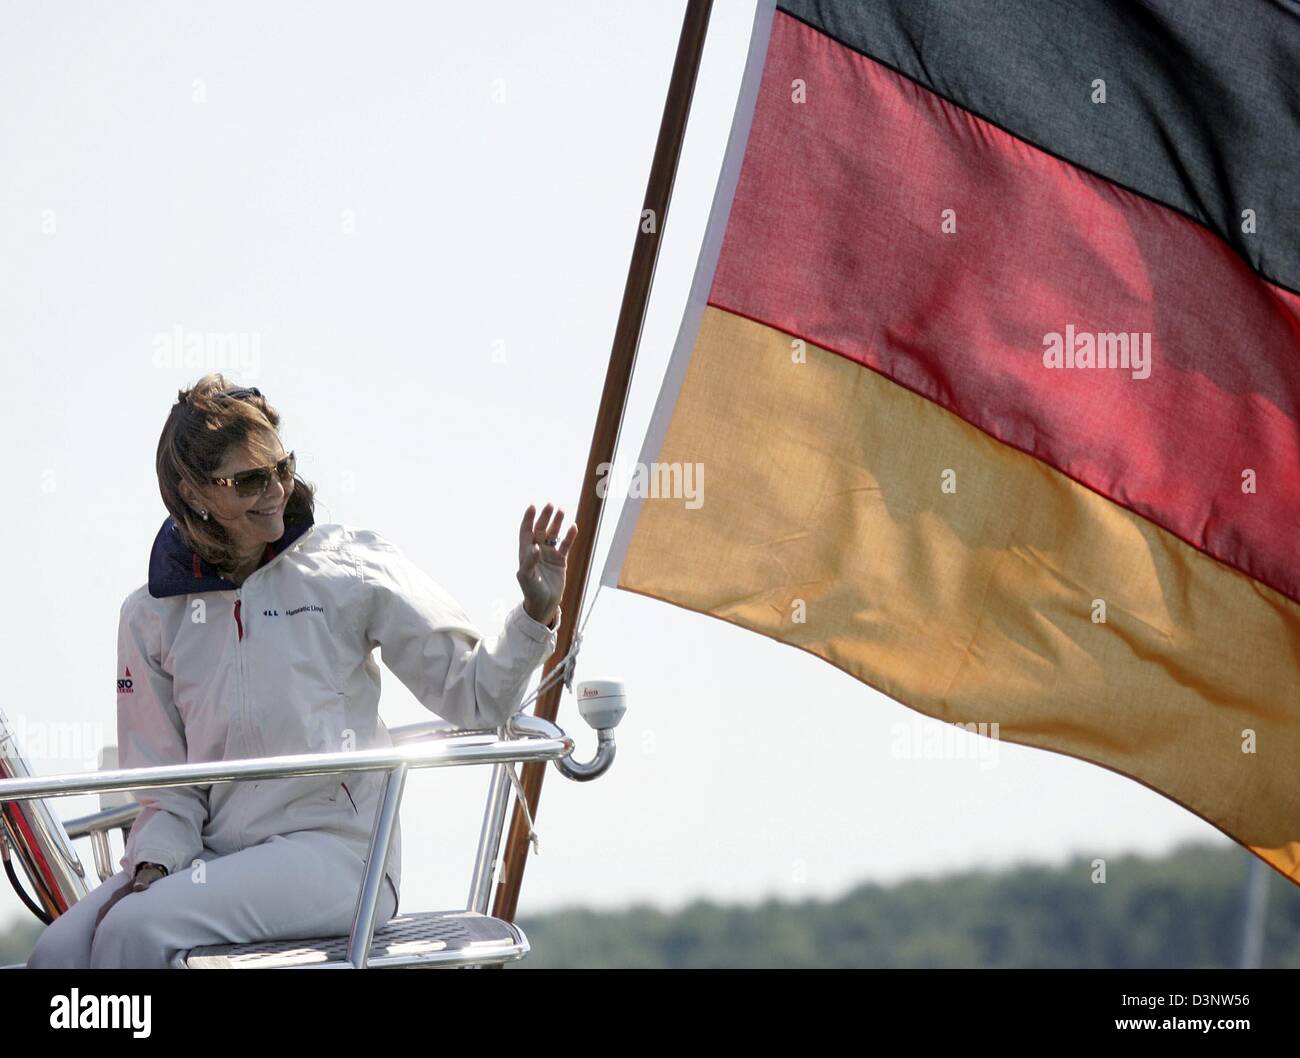 Queen Silvia of Sweden sits and waves on the yacht 'Marantha' next to a German flag in Strande near Kiel, Germany, Monday, 3 July 2006. The monarch with German origin gave the start signal for the 'Childhood Charity Race' at the 'Kieler Förde'. The proceeds will be donated to the 'Childhood Foundation' which Silvia founded. It helps impoverished children all over the world. Photo:  Stock Photo